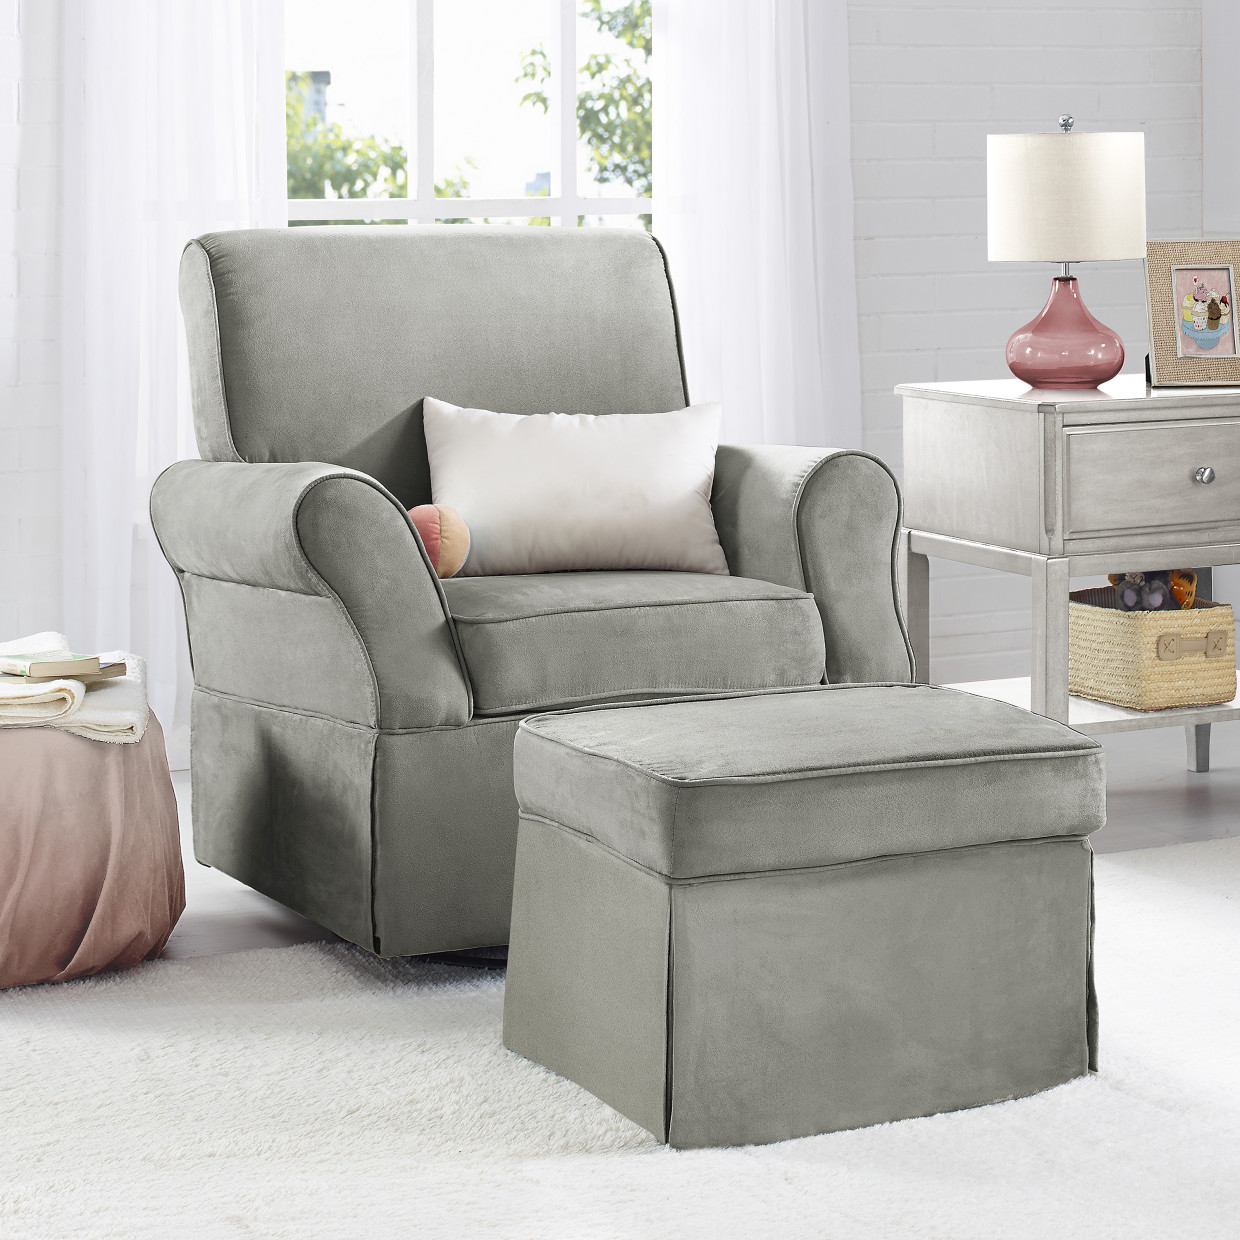 Baby Relax Kelcie Swivel Glider Chair and Ottoman Set - Gray Microfiber.